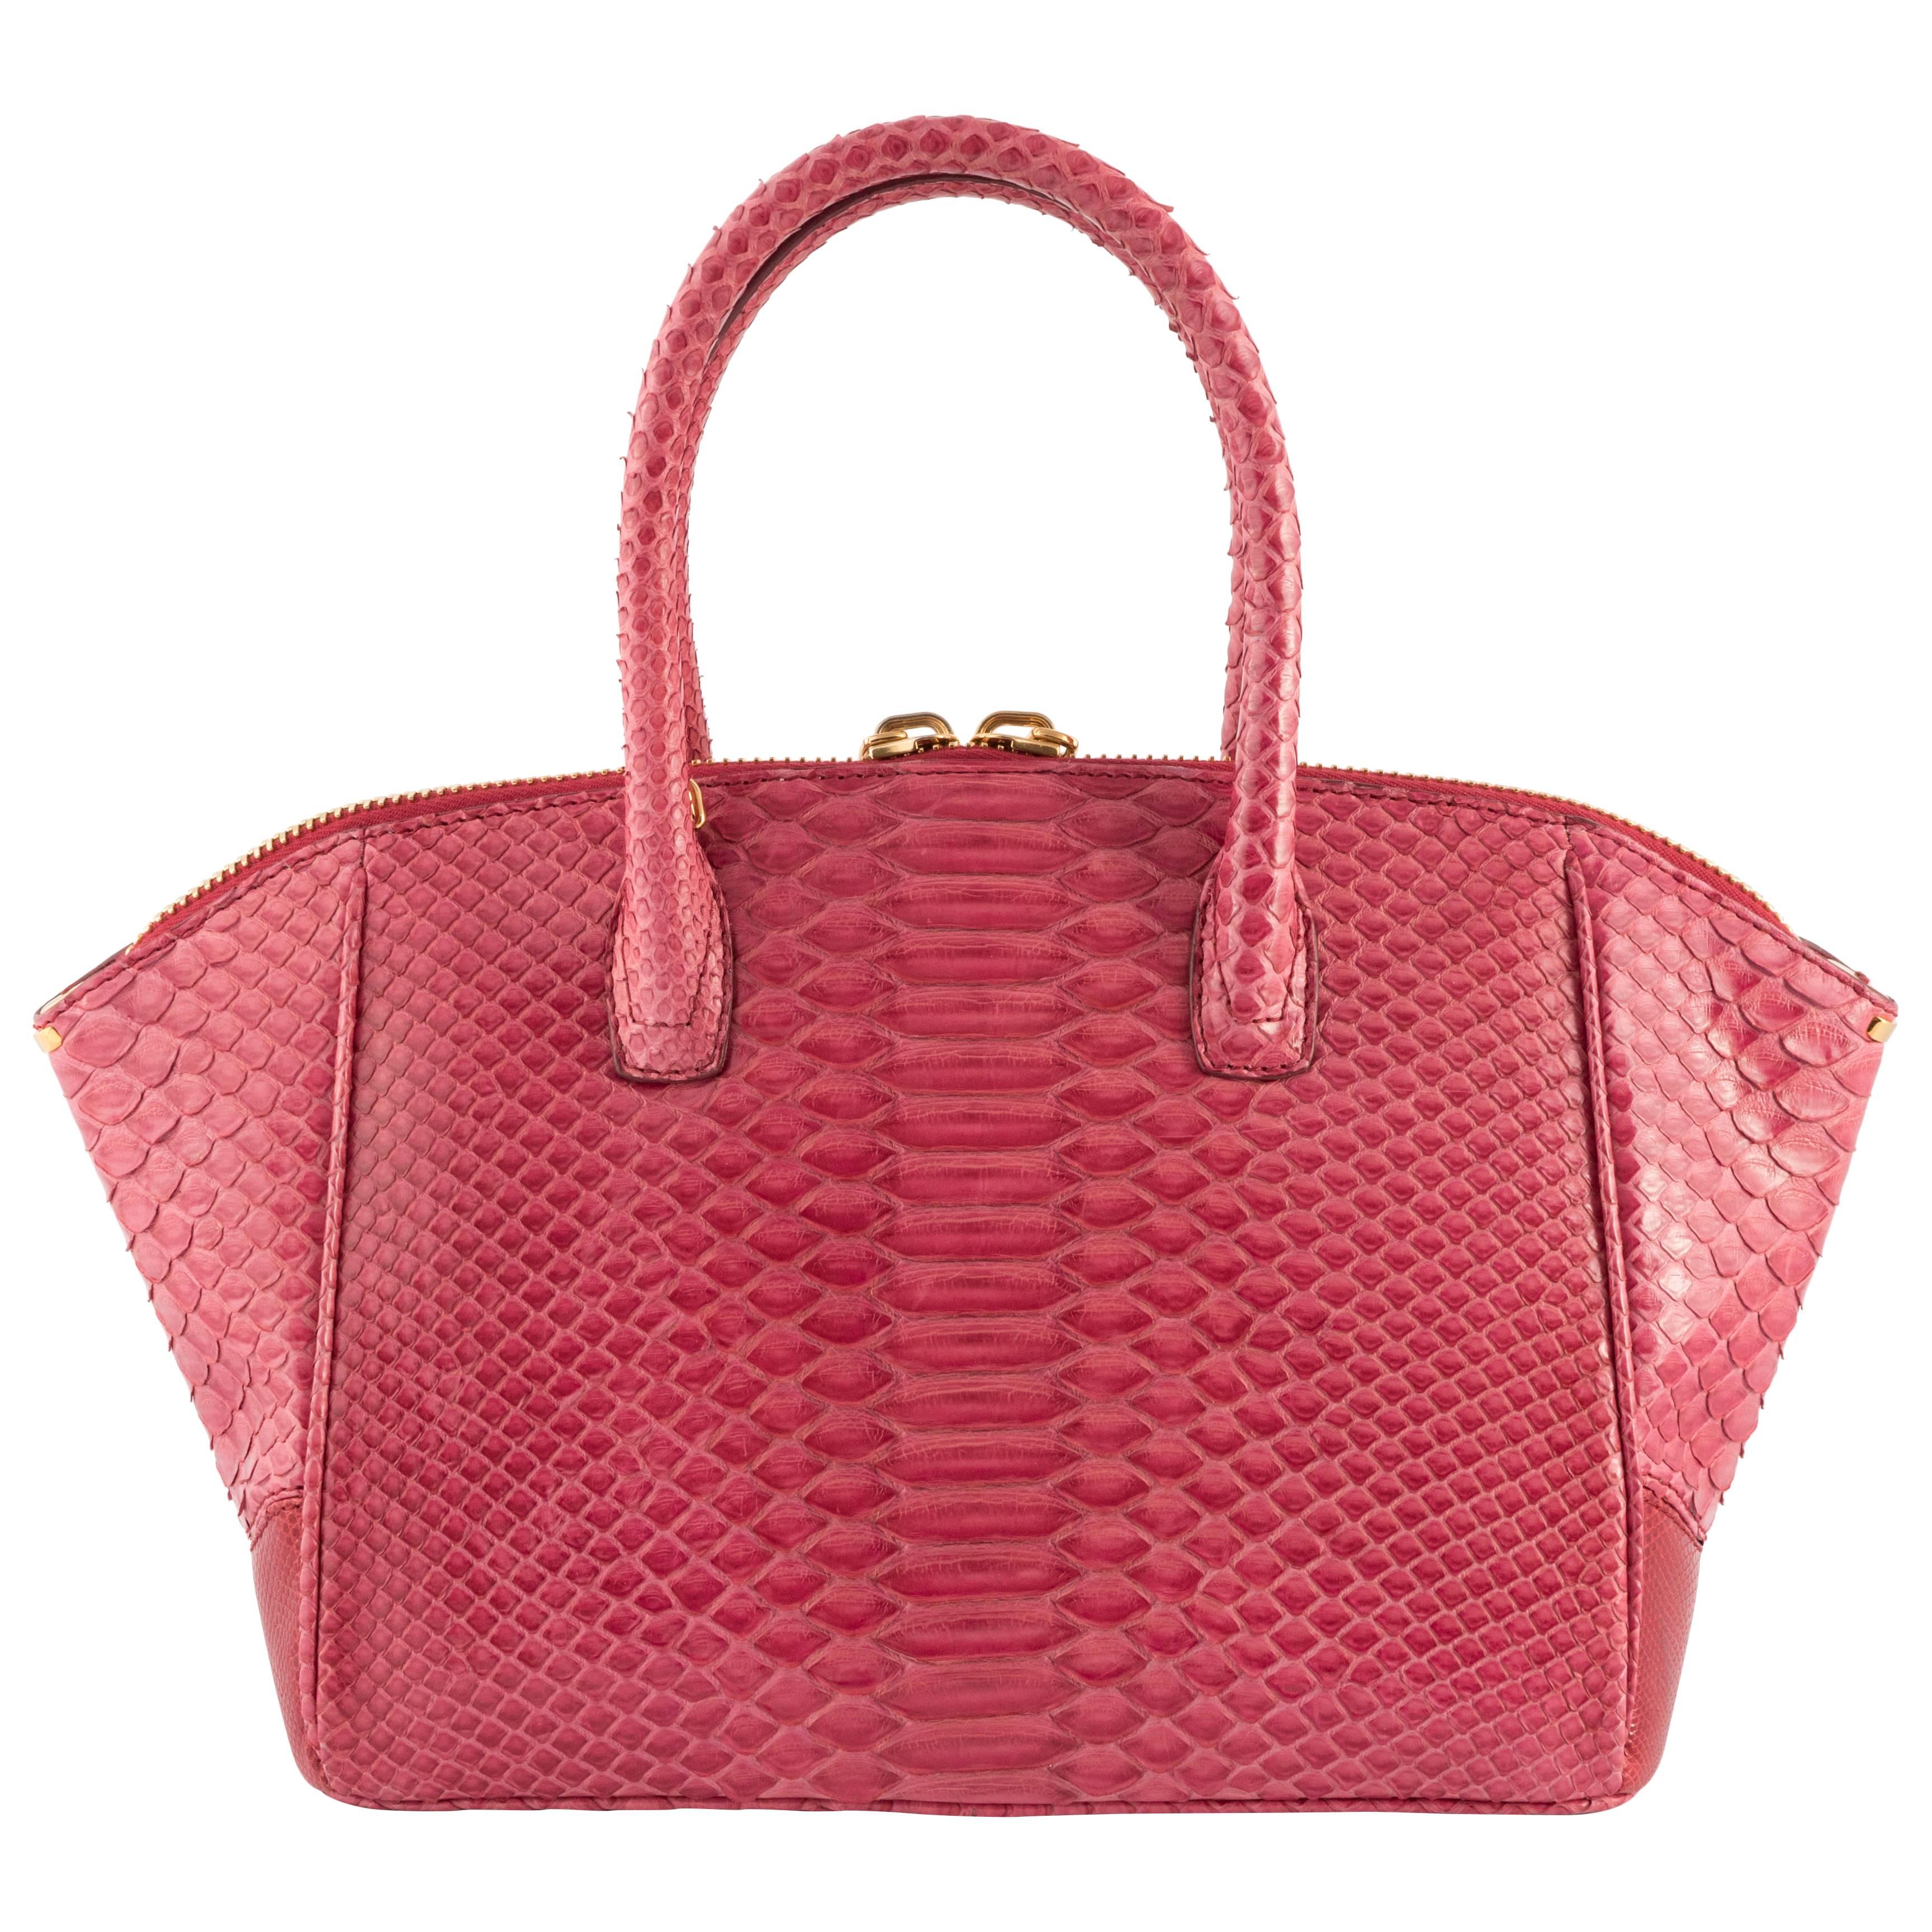 VBH Brera 26cm Matte Wine Python and Lizard Top Handle Tote In New Condition For Sale In New York, NY